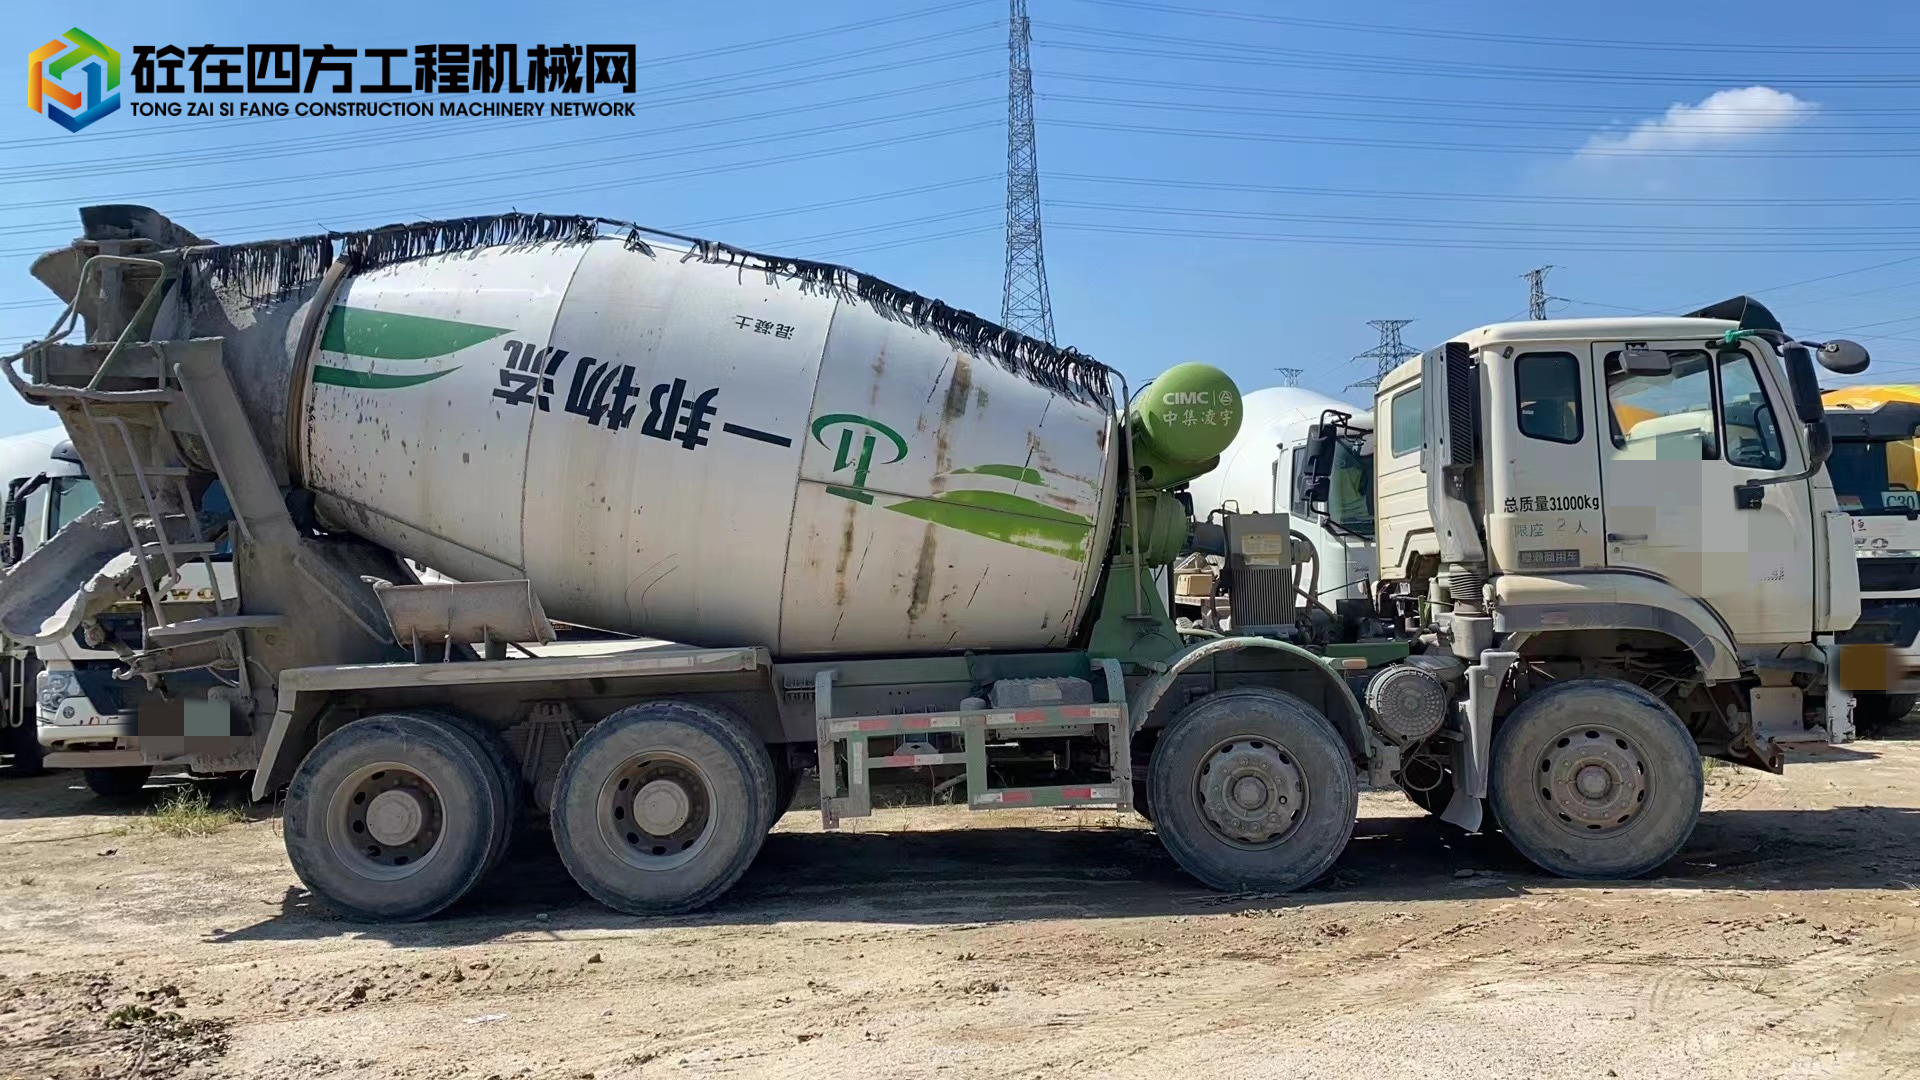 https://images.tongzsf.com/tong/truck_machine/20240102/16593cb55ad1ee.jpg